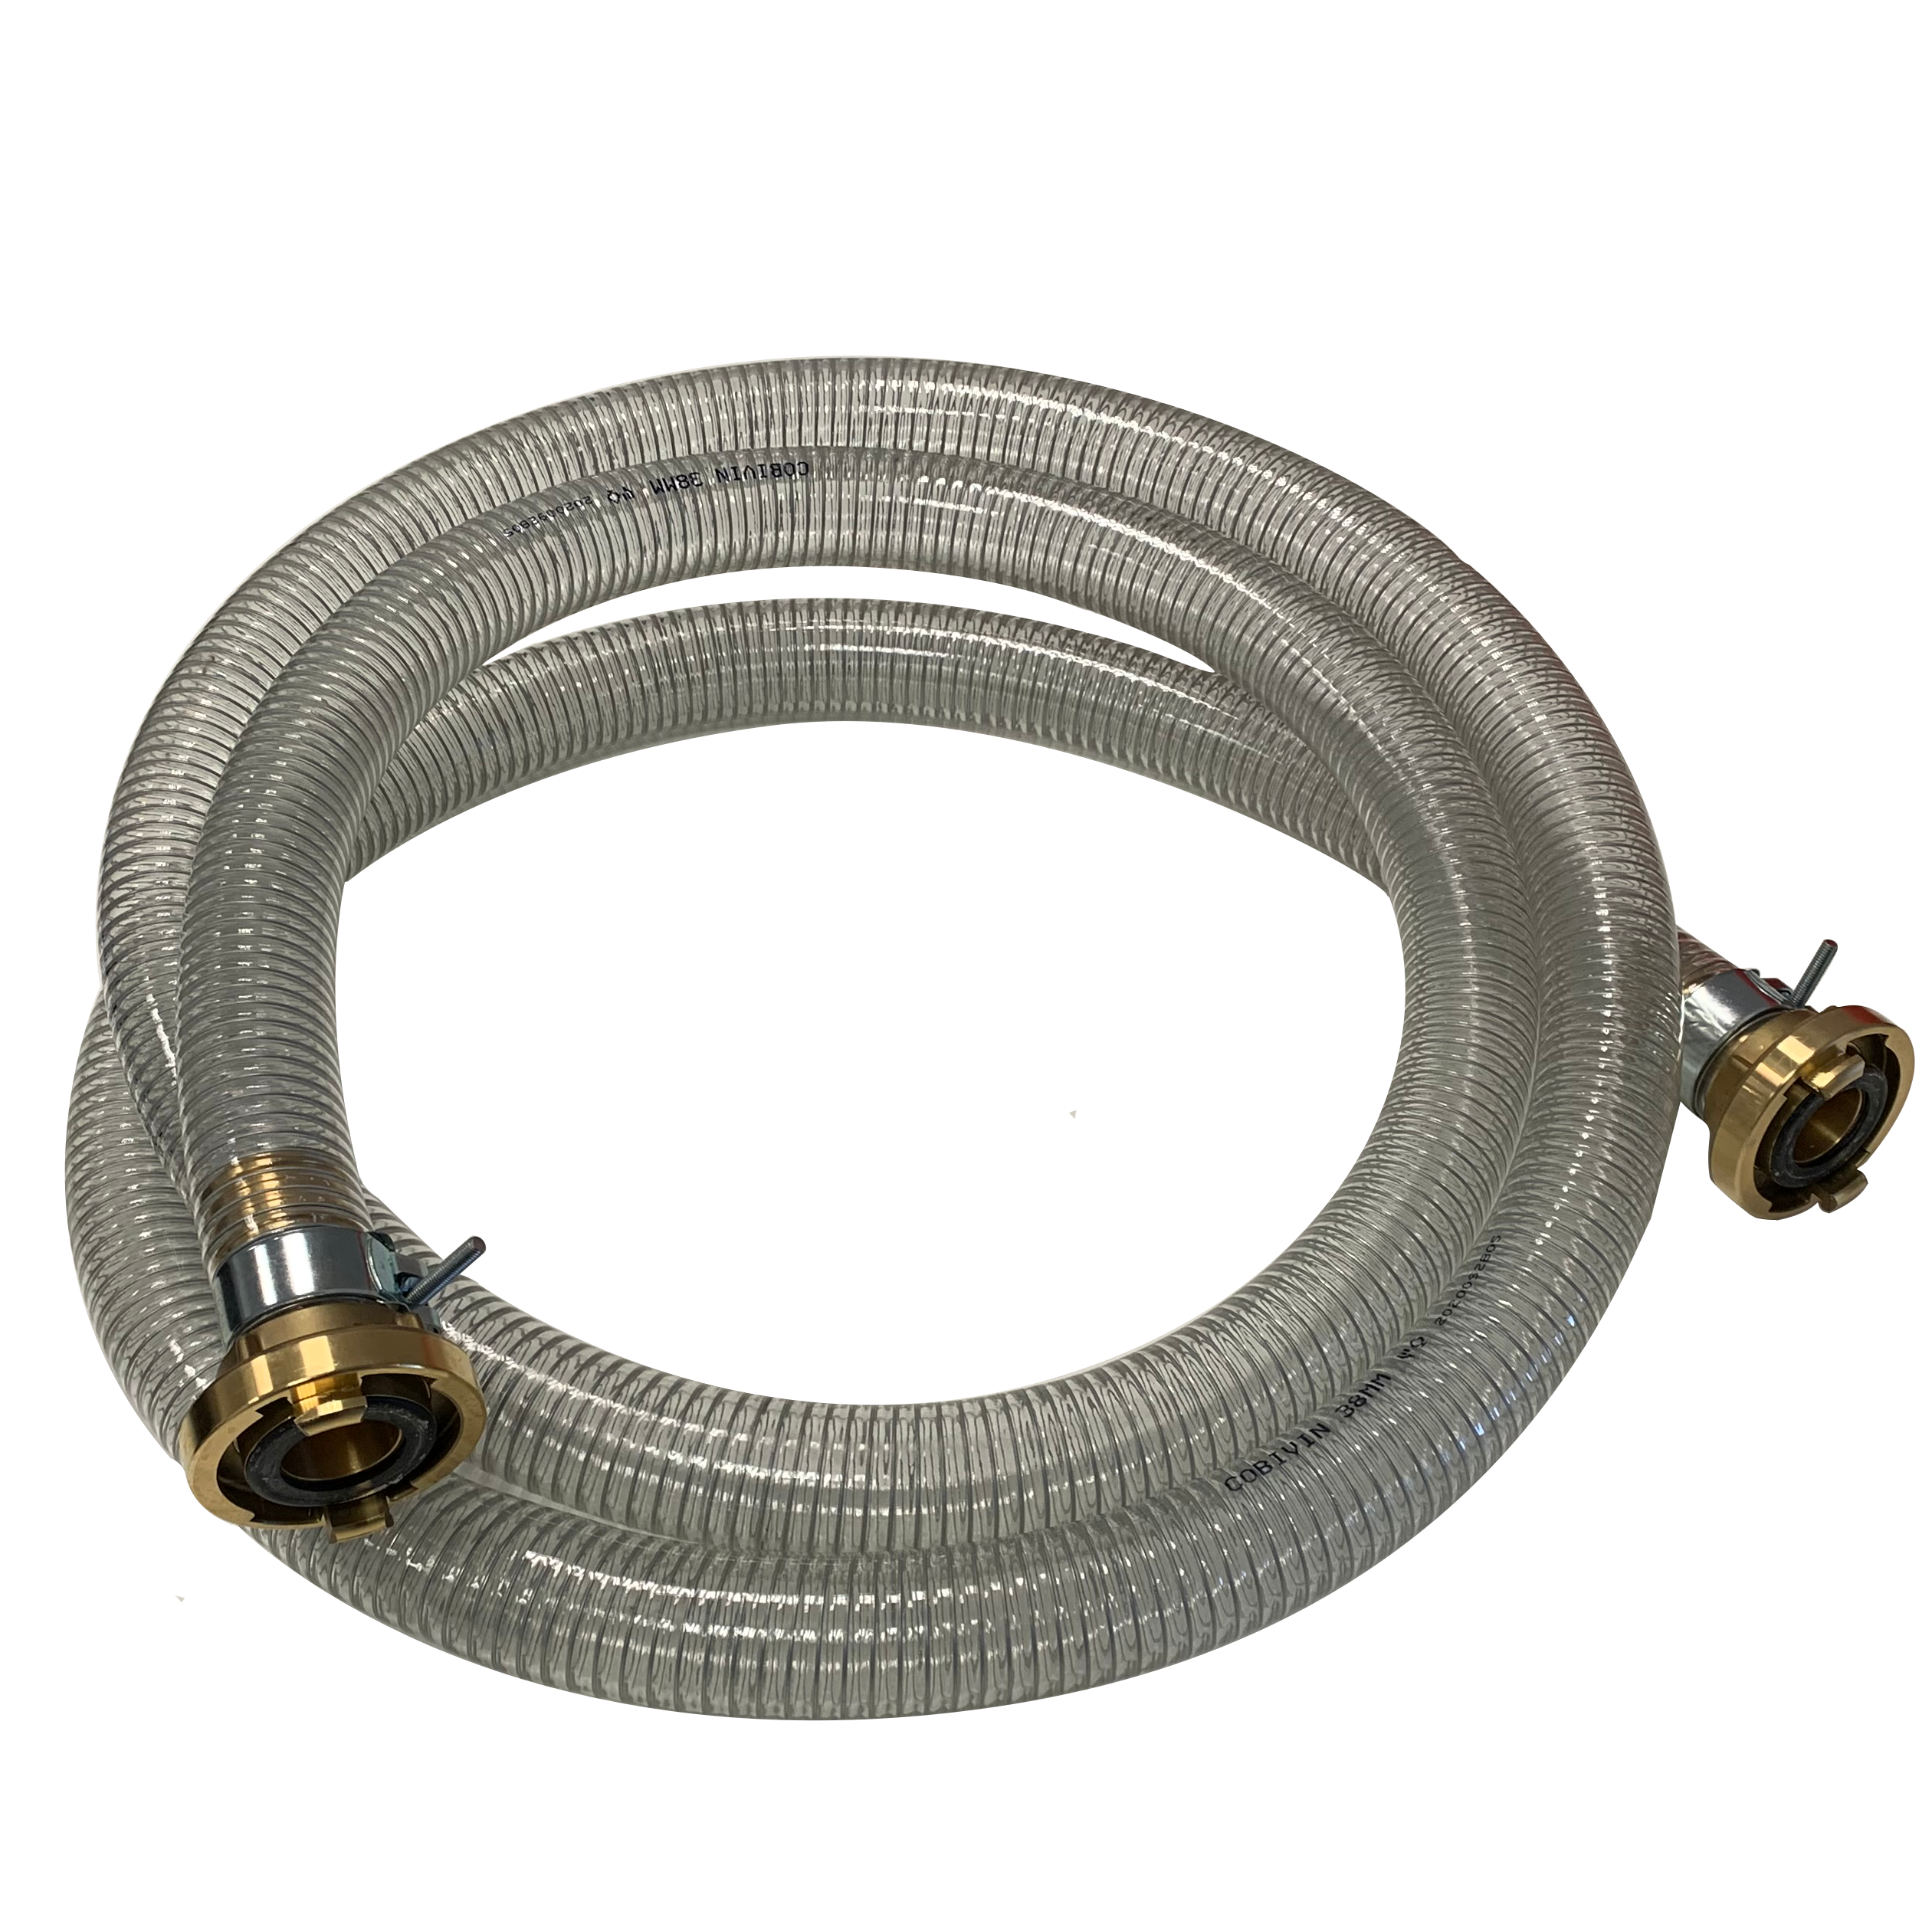 https://awg-fittings.com/media/image/7f/3f/80/AWG_62090493_Ansaugschlauch-DN38-4000-2x38-MS.png